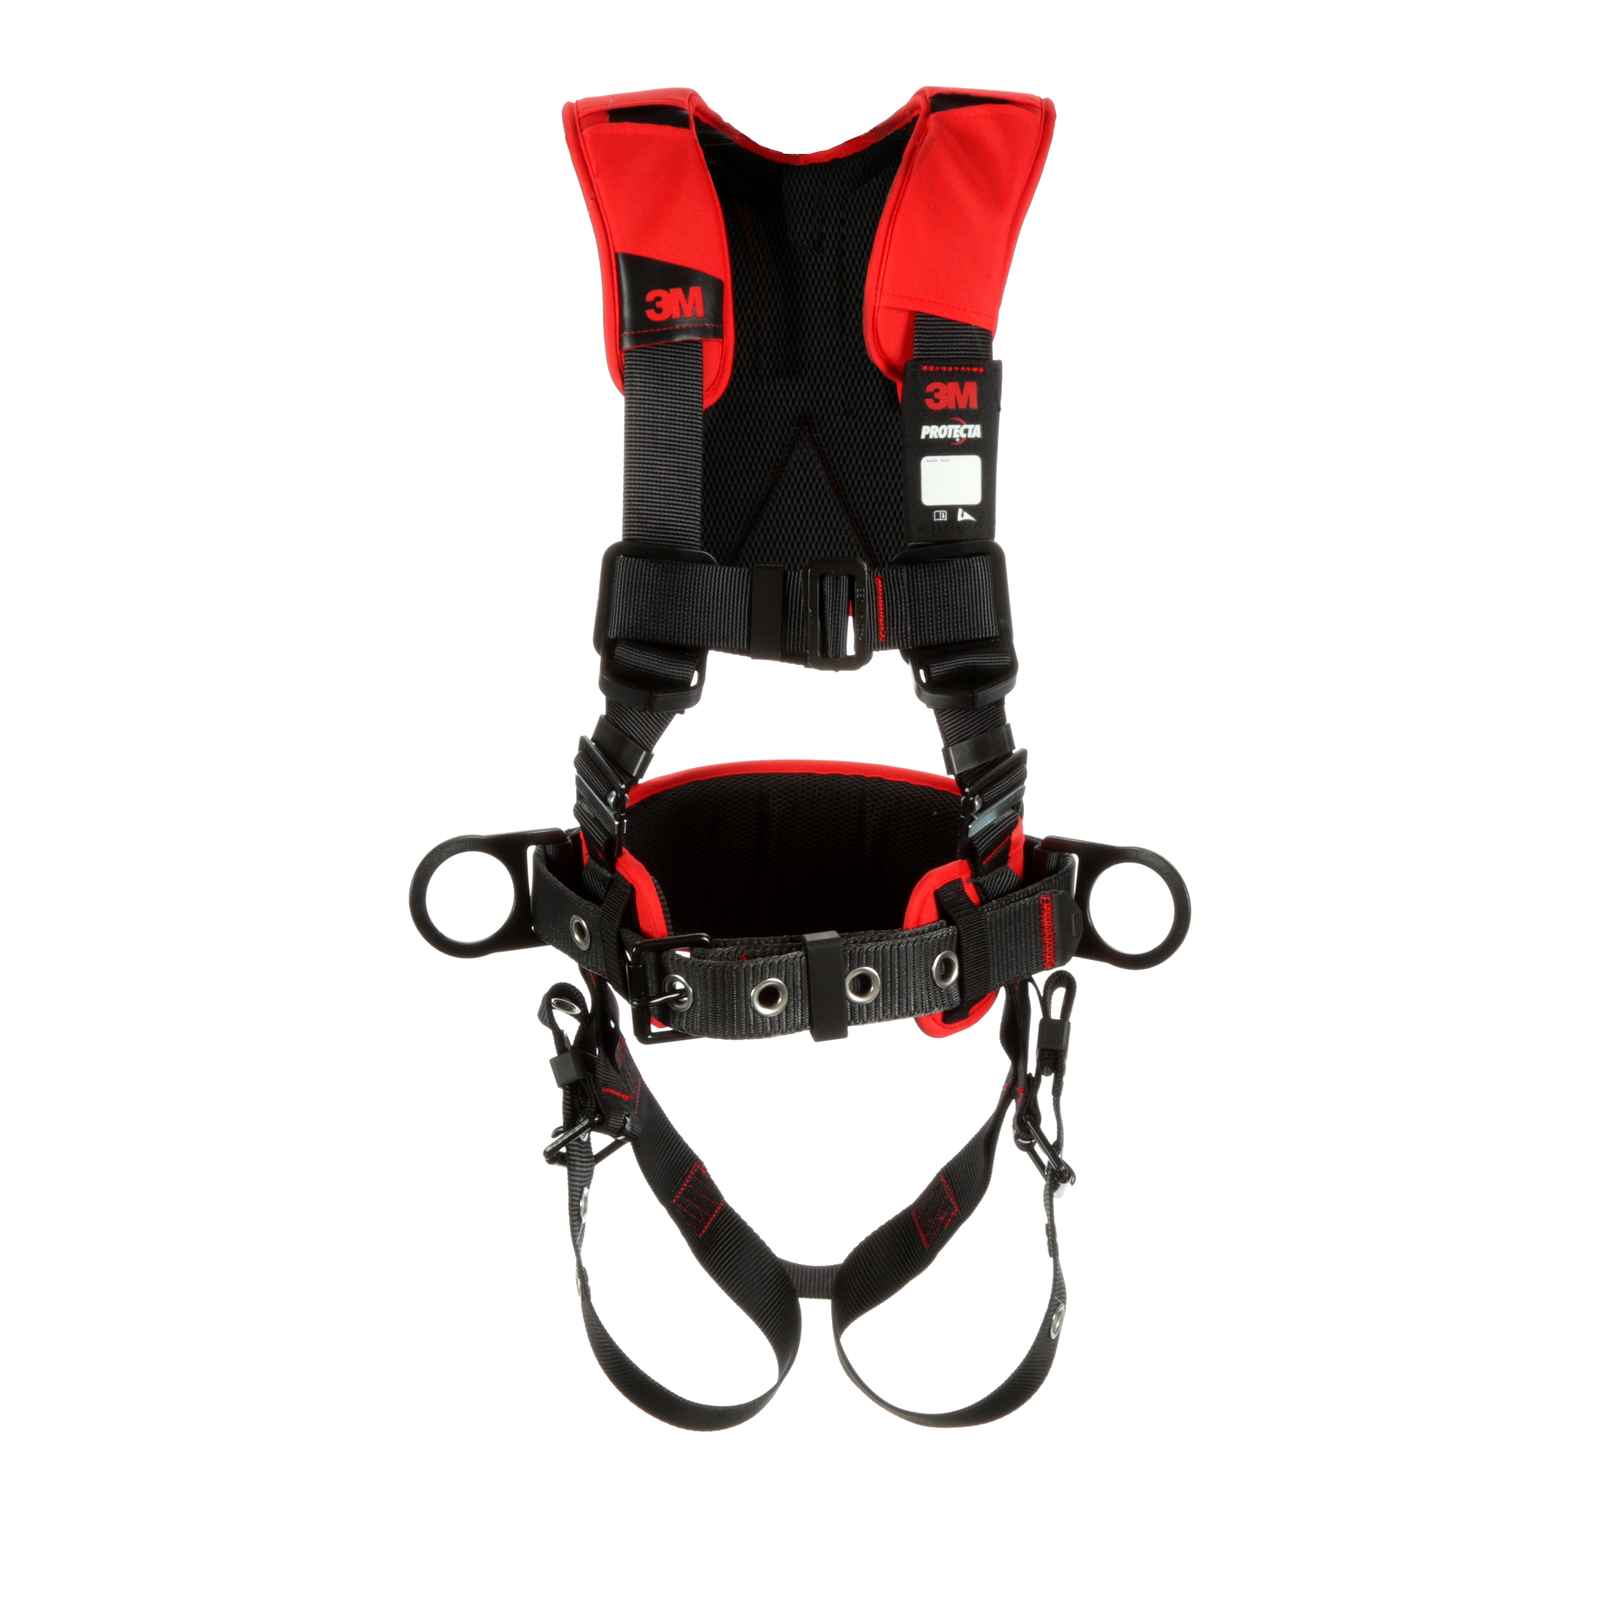 420 Pound Capacity with 3 D-Rings Tongue Buckle Legs Red/Black, Medium/Large 3M Protecta PRO 1191385 Fall Protection Full Body Welders Harness